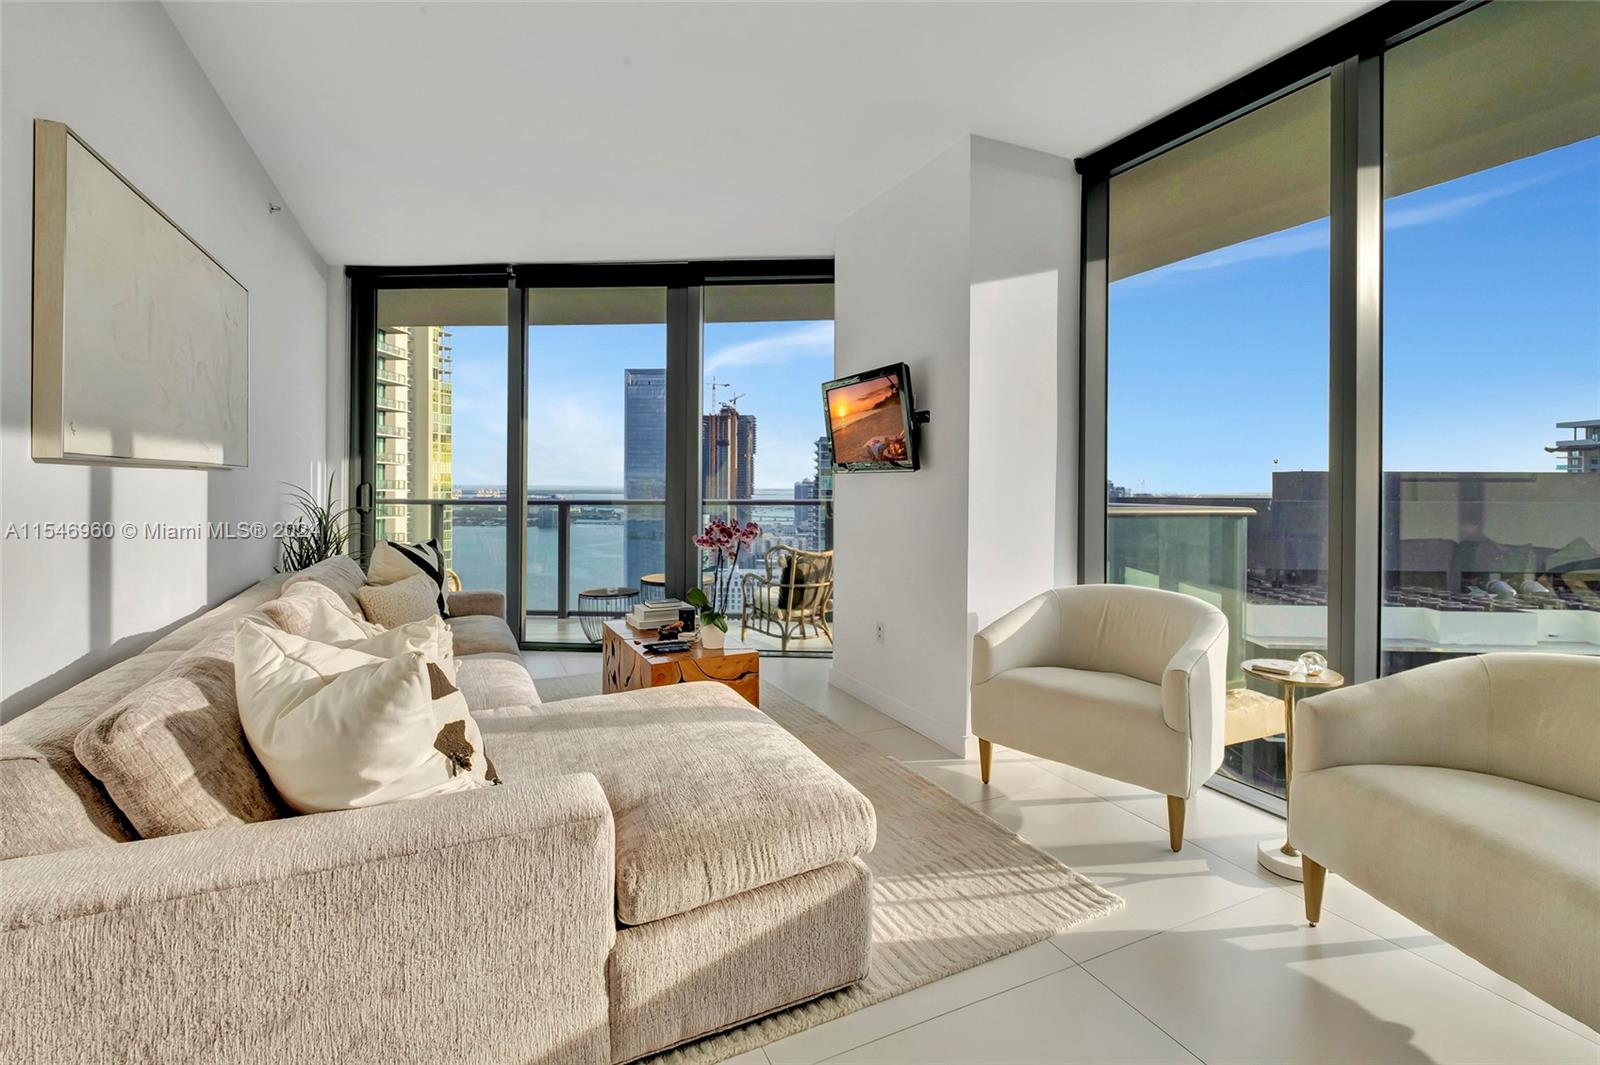 Welcome to your luxurious slice of paradise in the prestigious Edgewater neighborhood, where urban sophistication meets serene waterfront living. This exquisite corner unit condo, located in a sought-after high-rise building, boasts unparalleled views of the shimmering city skyline and tranquil bay waters. This condo is a true gem, offering the perfect blend of elegance, comfort, and convenience. As you step into this sanctuary in the sky, you are immediately greeted by an abundance of natural light that streams in through the expansive floor-to-ceiling windows, illuminating the finely appointed interiors and highlighting the meticulous attention to detail throughout the space. Contact us today to schedule a private viewing and experience the pinnacle of upscale urban lifestyle.